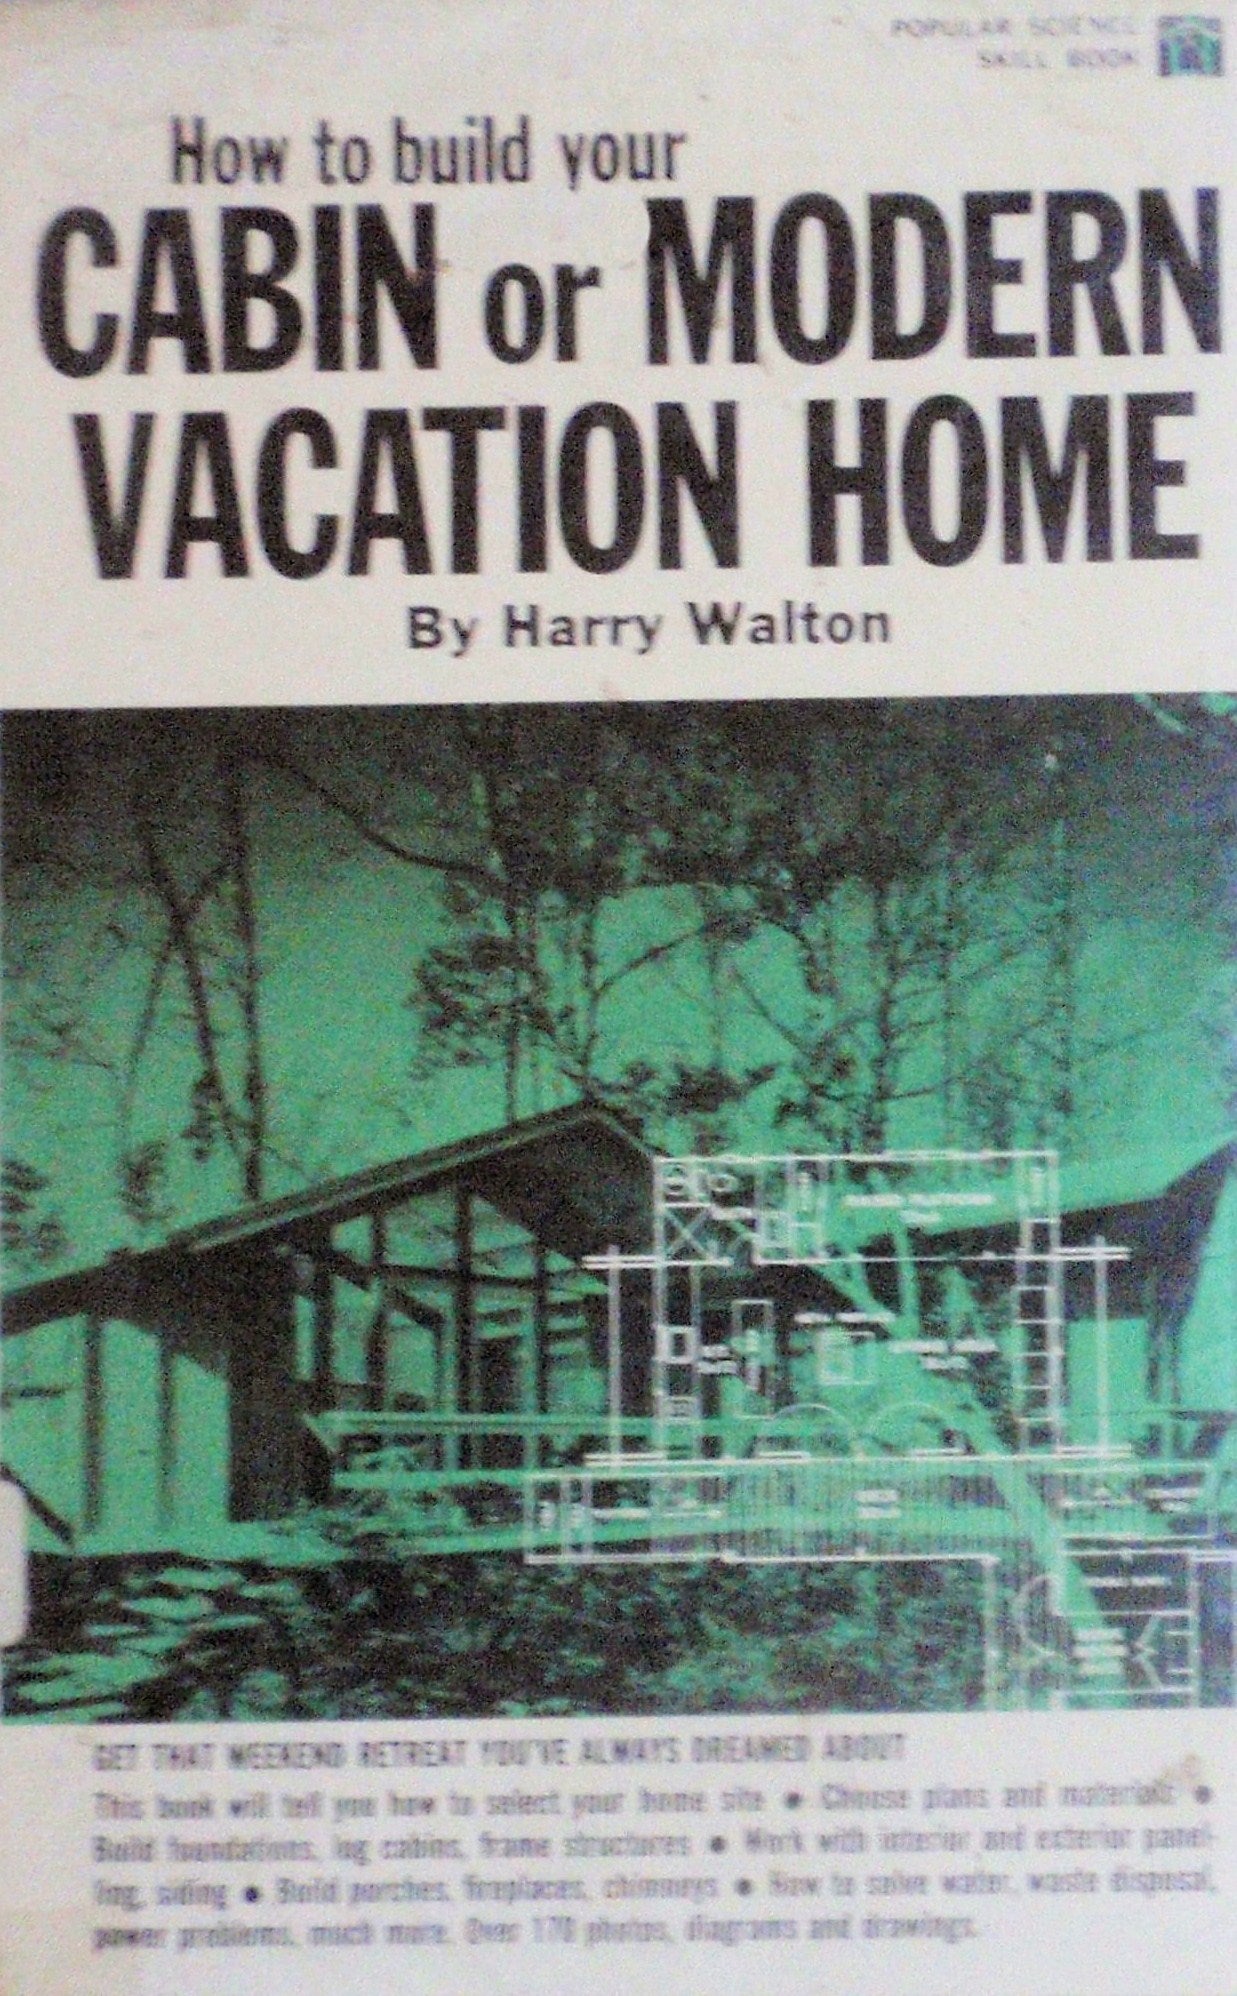 Livre ISBN 0060072008 How to build your cabin or modern vacation home (Harry walton)